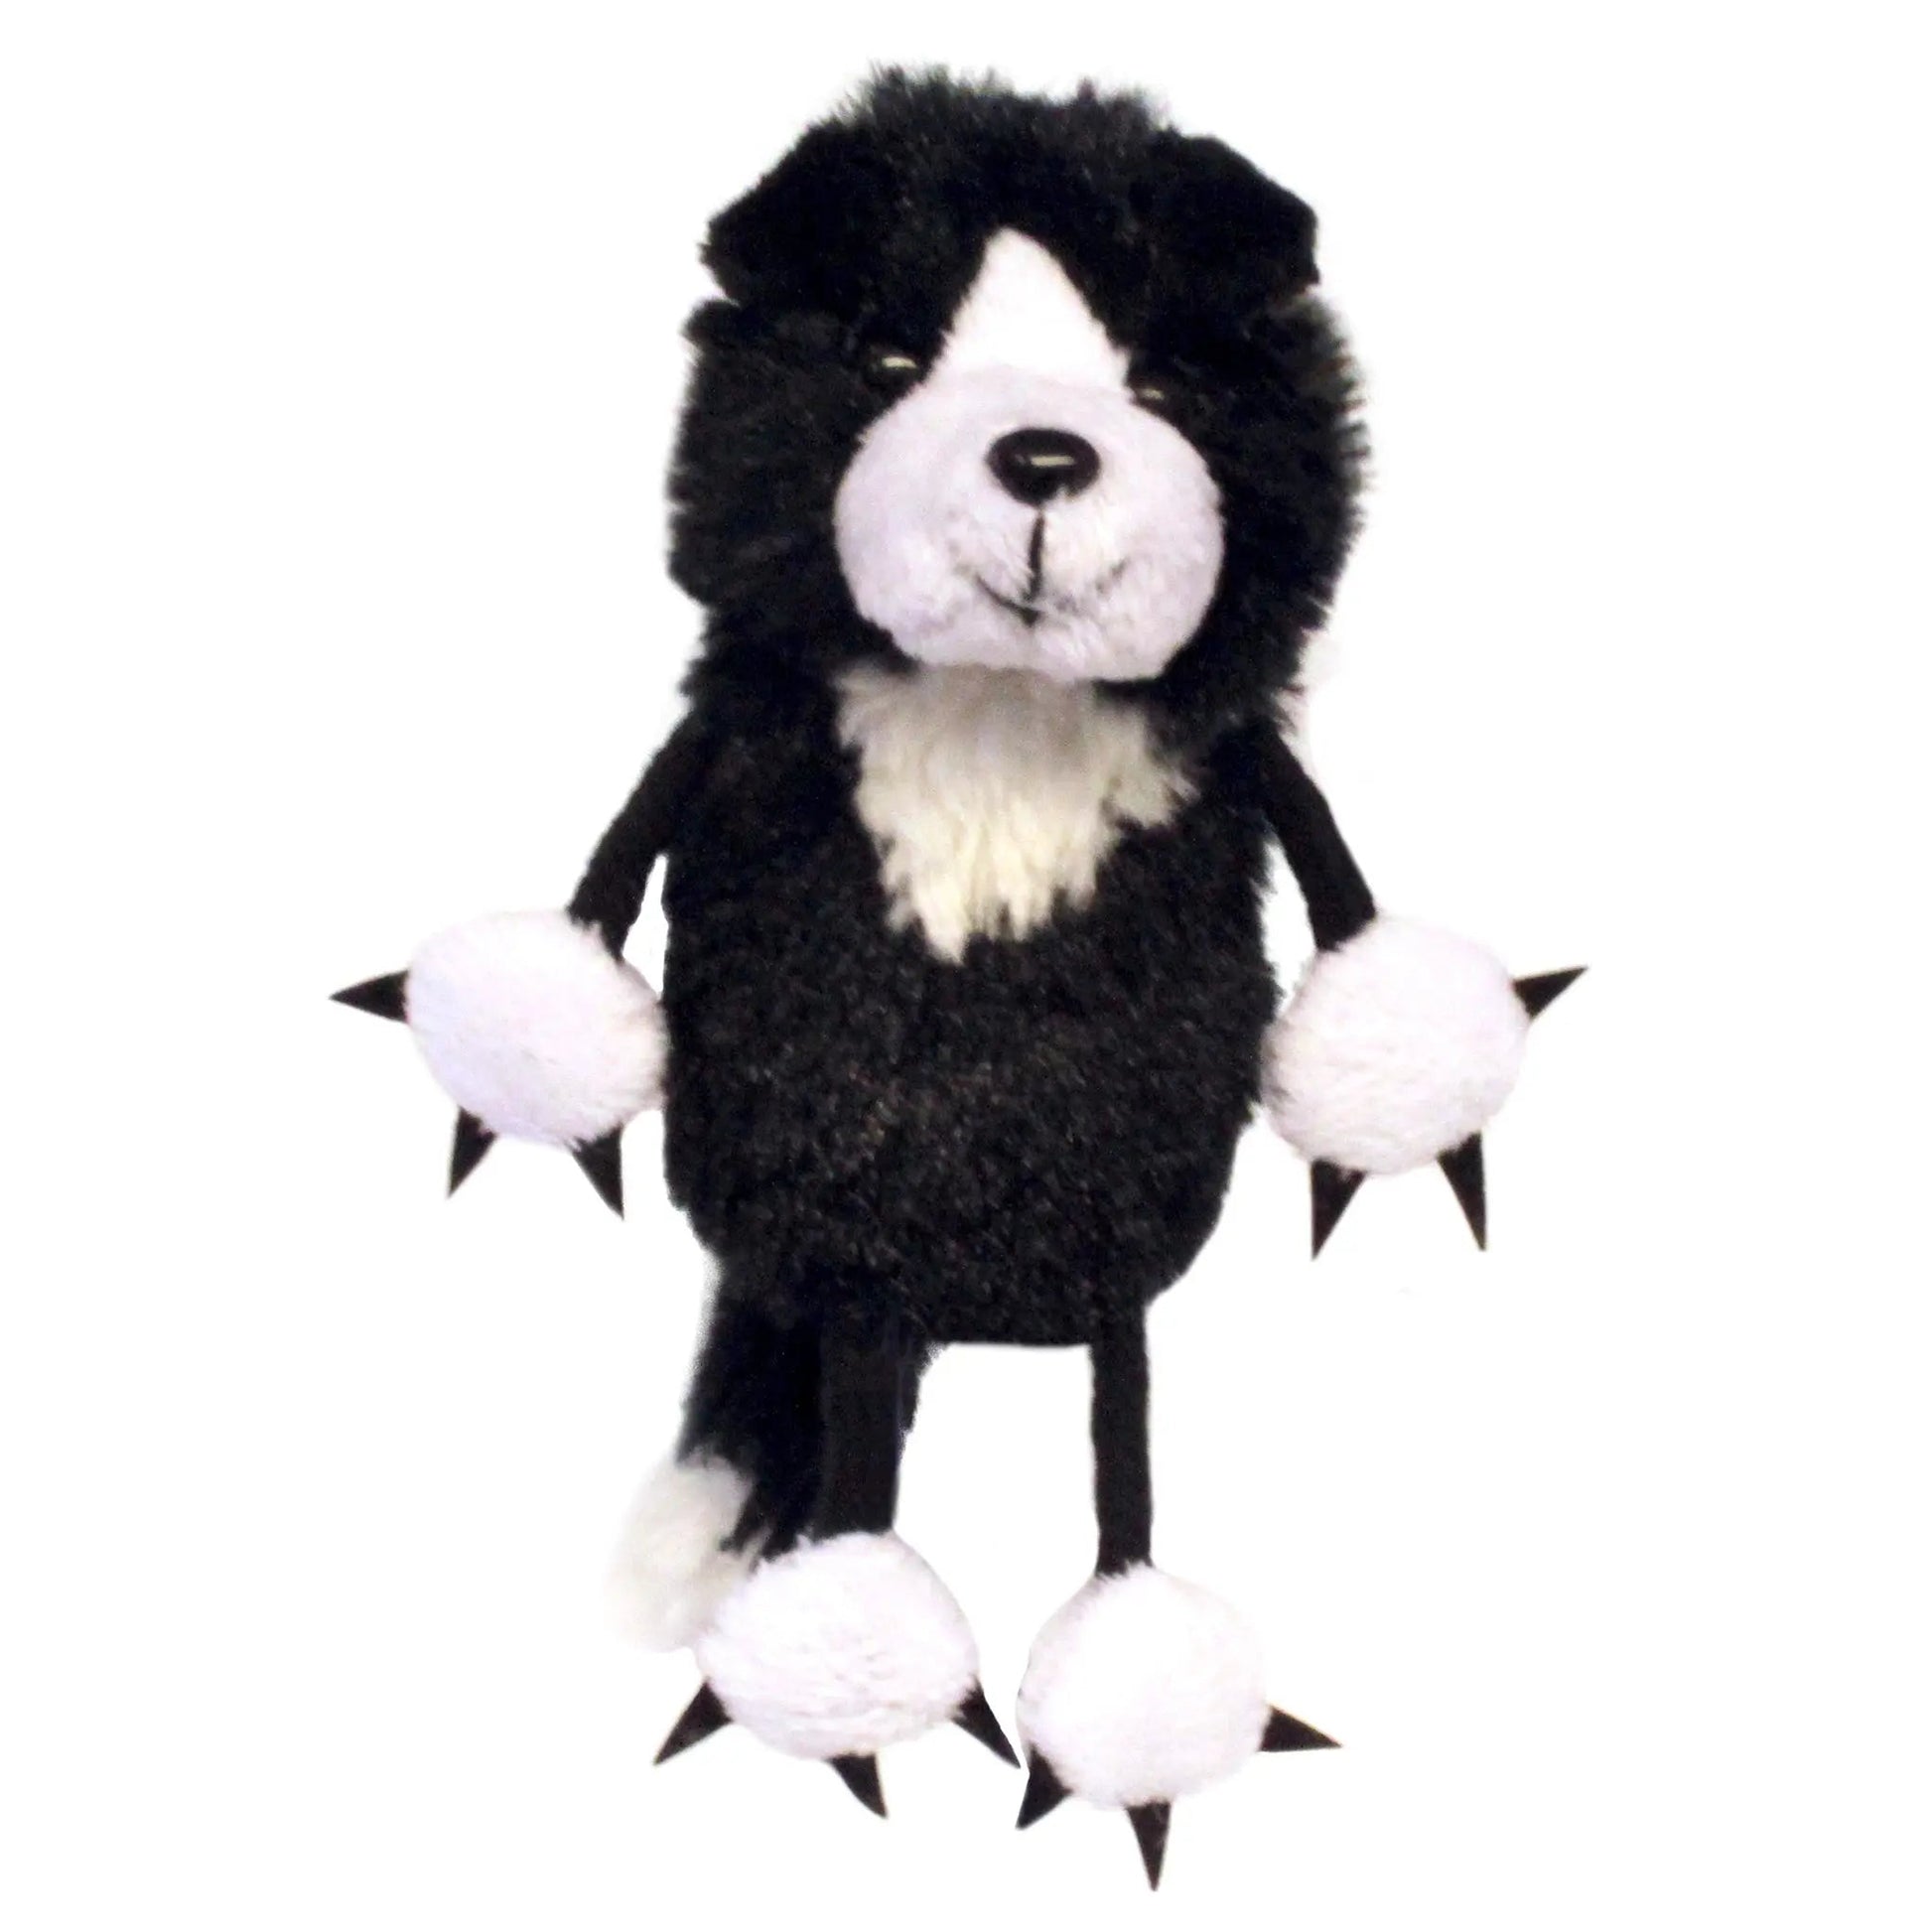 Border Collie Finger Puppet - The Puppet Company - The Forgotten Toy Shop